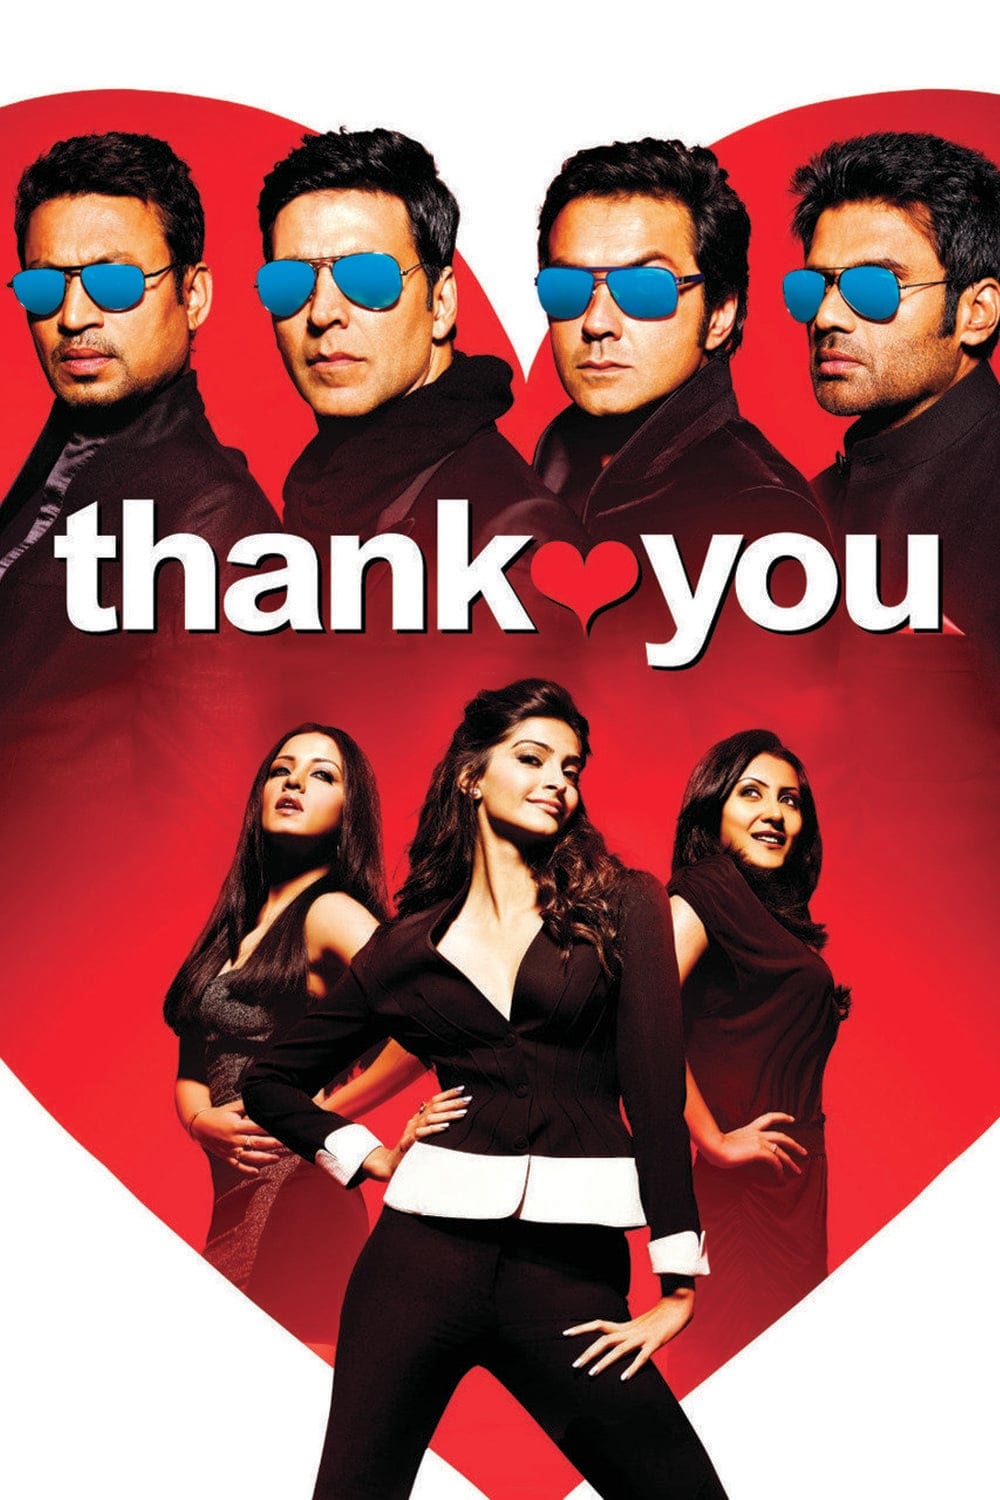 Poster for the movie "Thank You"